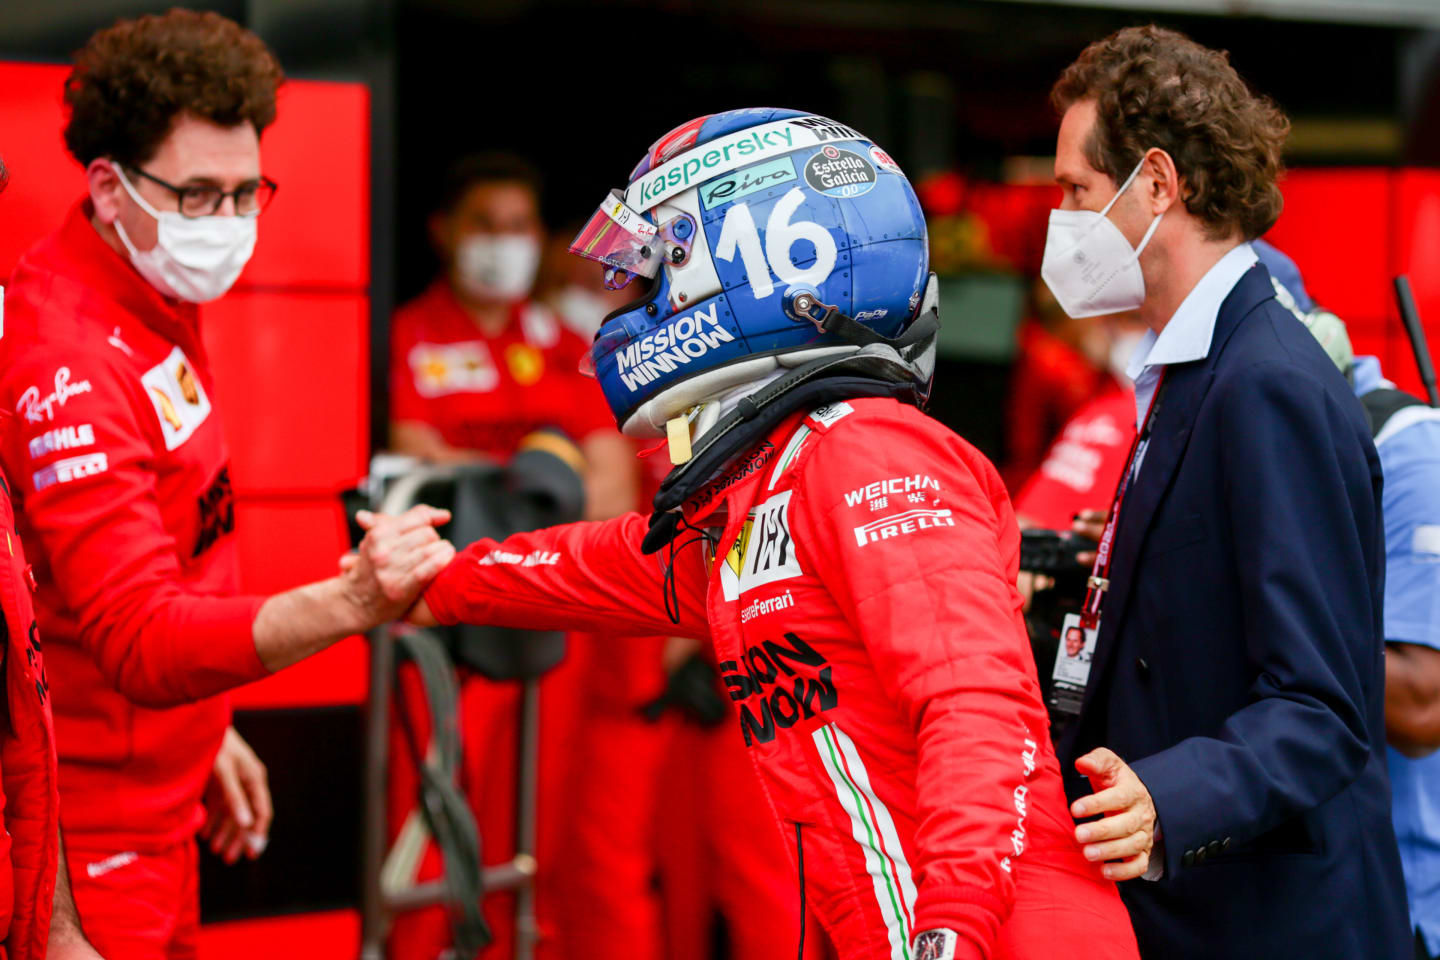 MONTE-CARLO, MONACO - MAY 22: Charles Leclerc of Ferrari and France is congratulated by Mattia Binotto of Italy and Ferrari during practice/qualifying ahead of the F1 Grand Prix of Monaco at Circuit de Monaco on May 22, 2021 in Monte-Carlo, Monaco. (Photo by Peter Fox/Getty Images)